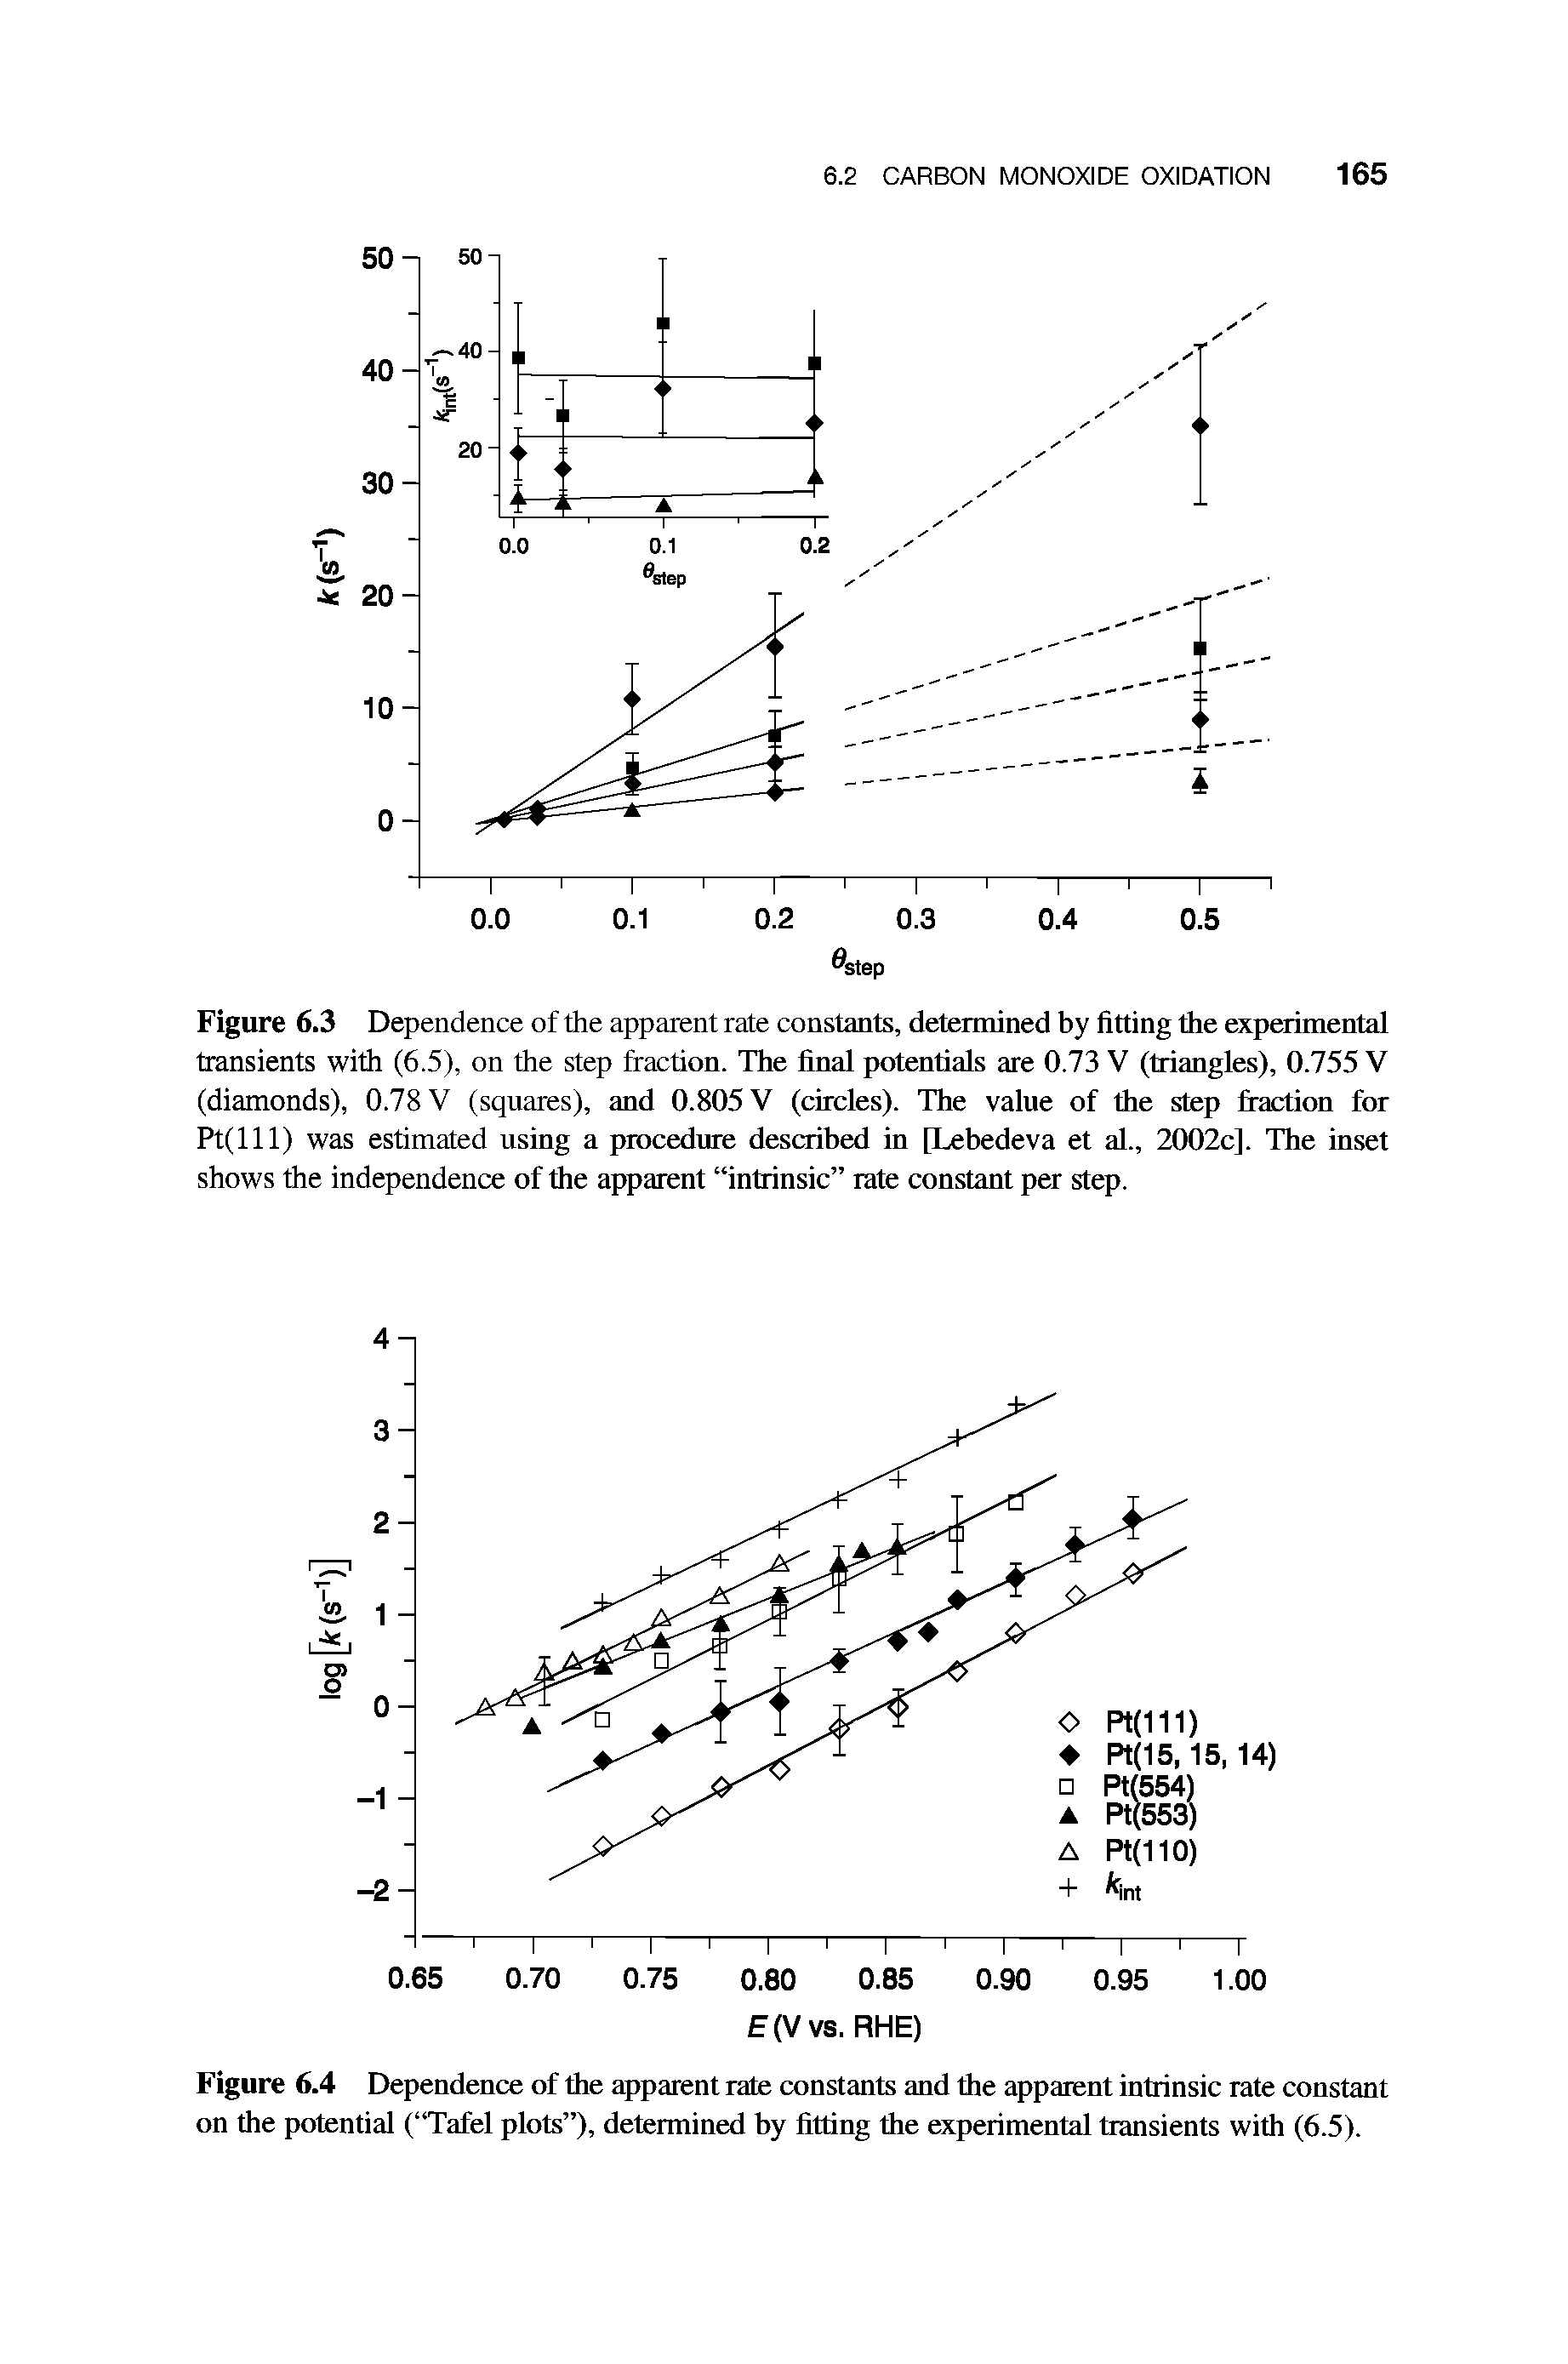 Figure 6.4 Dependence of the apparent rate constants and the apparent intrinsic rate constant on the potential ( Tafel plots ), determined by fitting the experimental transients with (6.5).